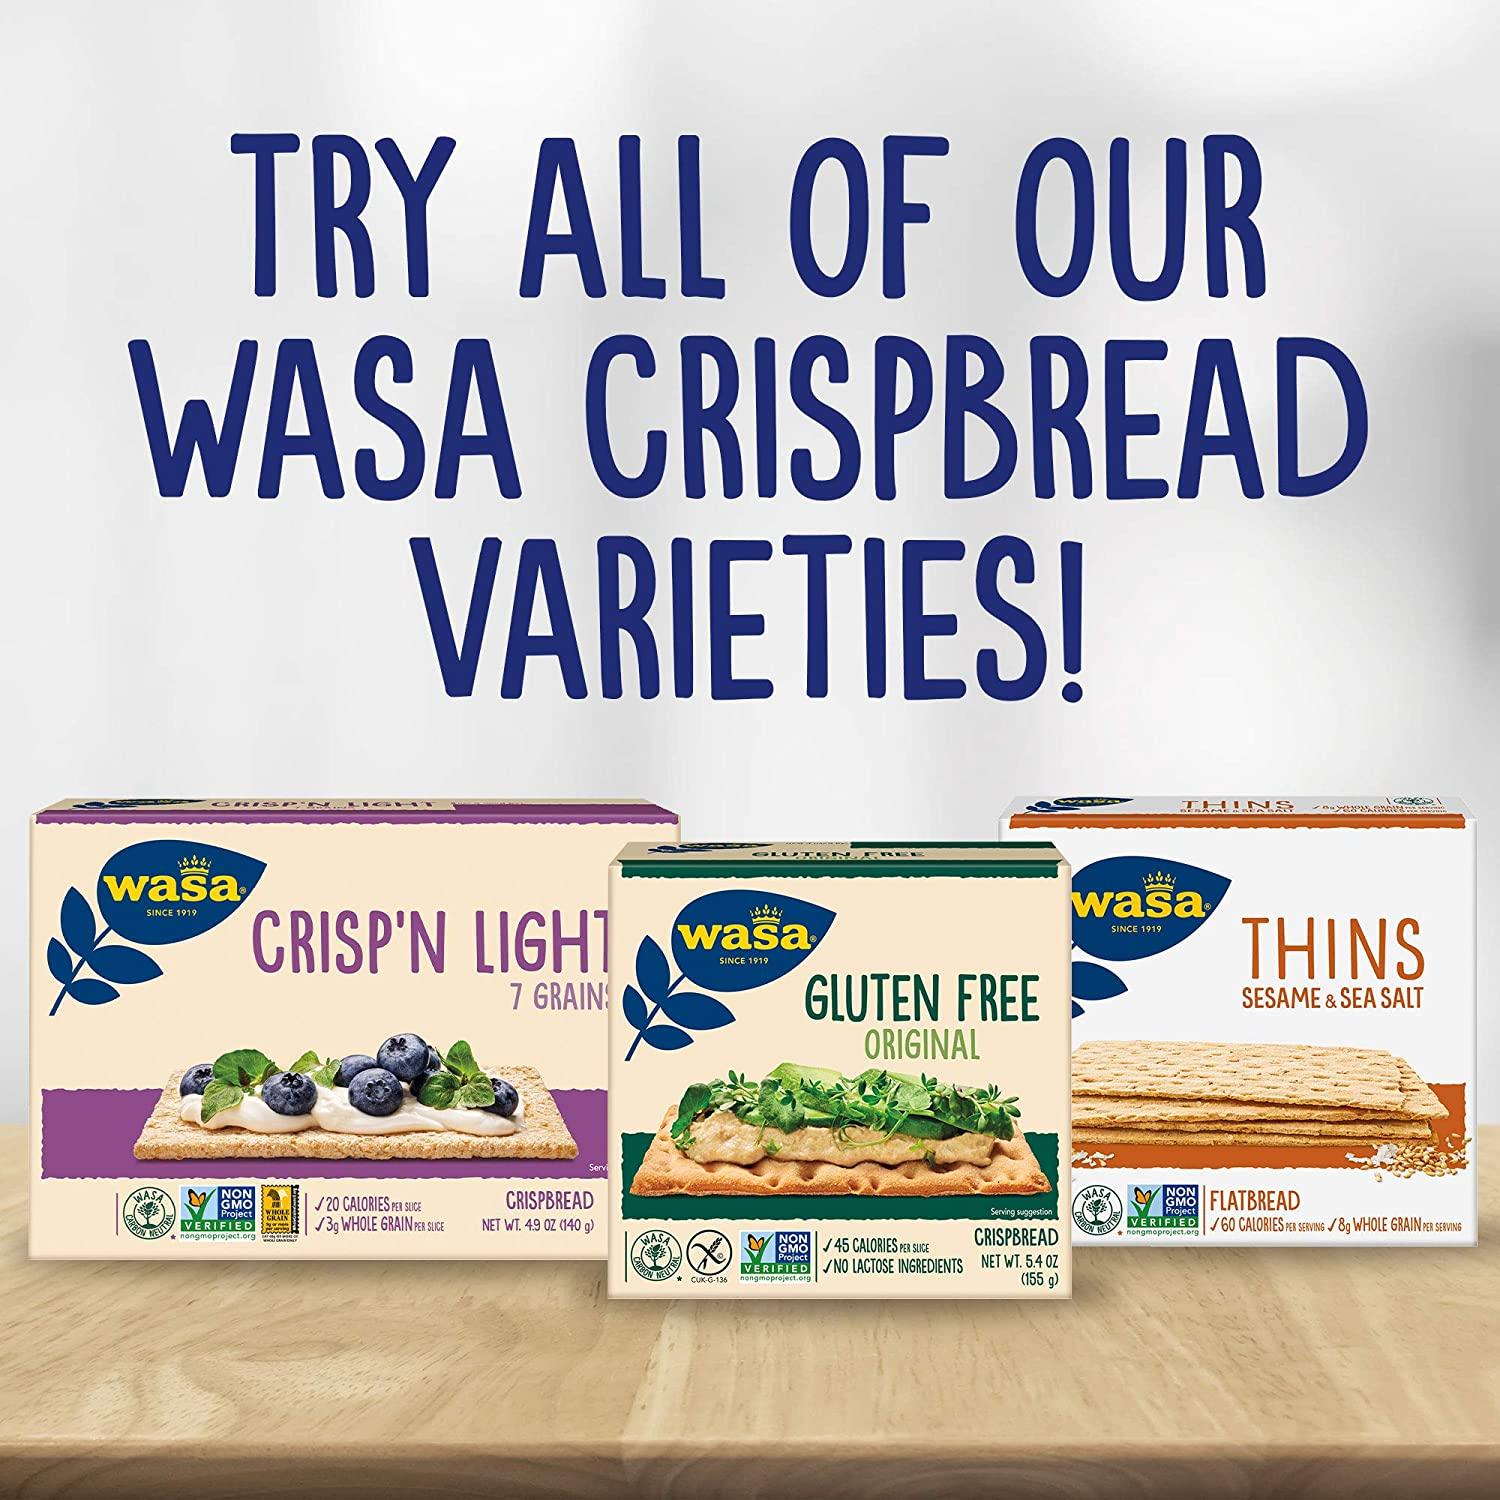 Wasa Swedish Crispbread All-Natural Crackers Fat Free No Saturated Fat 0g  of Trans Fat No Cholesterol Kosher Certified 3 Lb Variety Pack (2 Sourdough  2 Whole Grain)